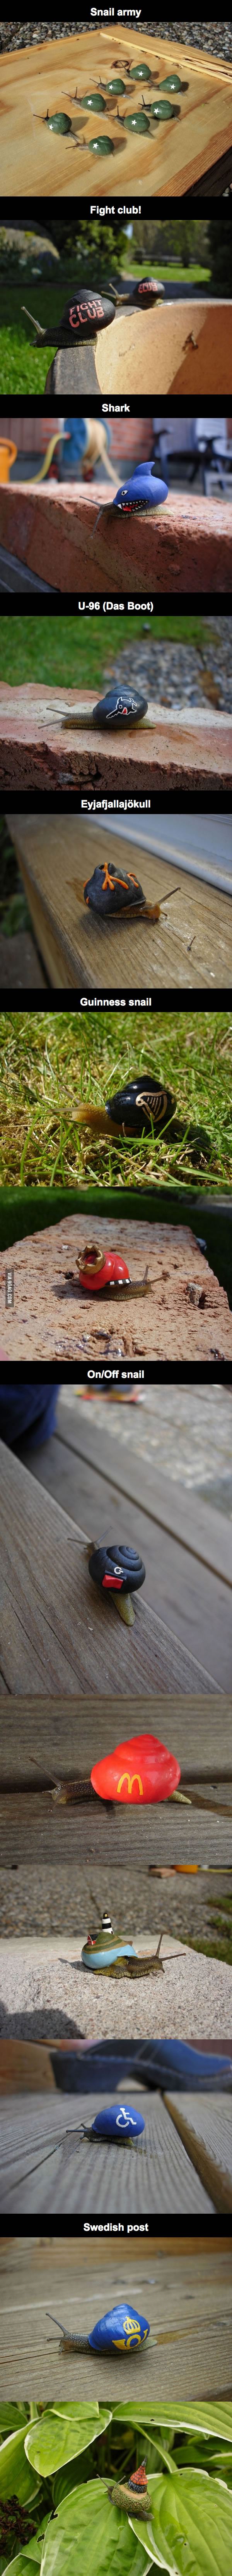 A-Swedish-Guy-Lost-His-Job-Then-He-Took-Up-Snail-Painting-As-A-Hobby